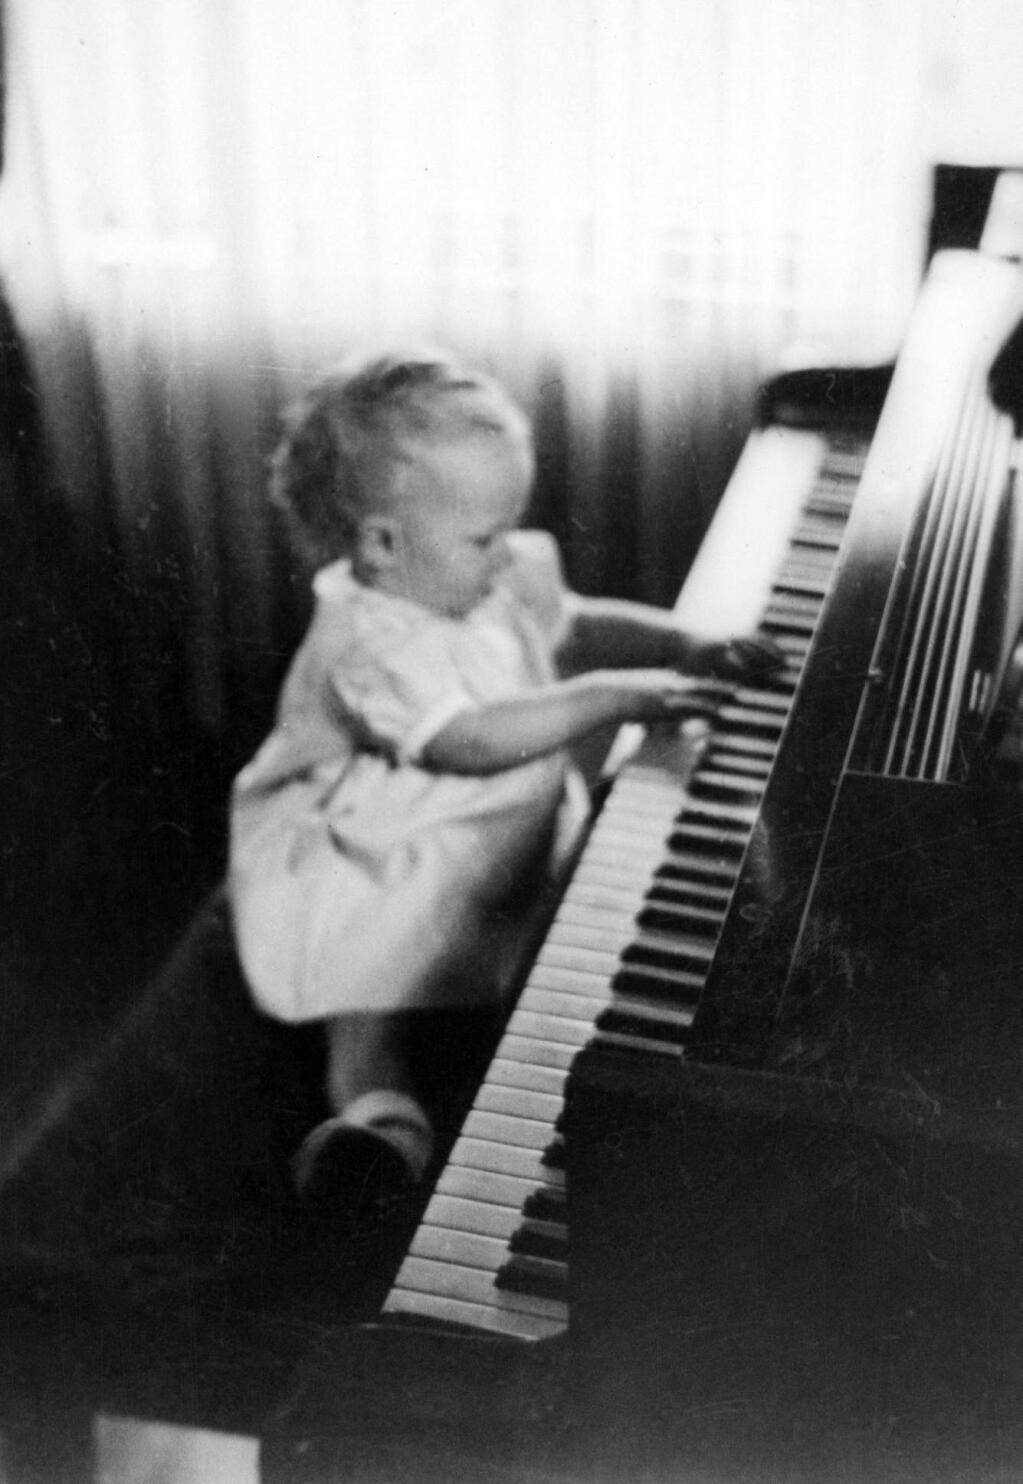 At about 18 months, Carol Rosenberger was already in love with the piano.